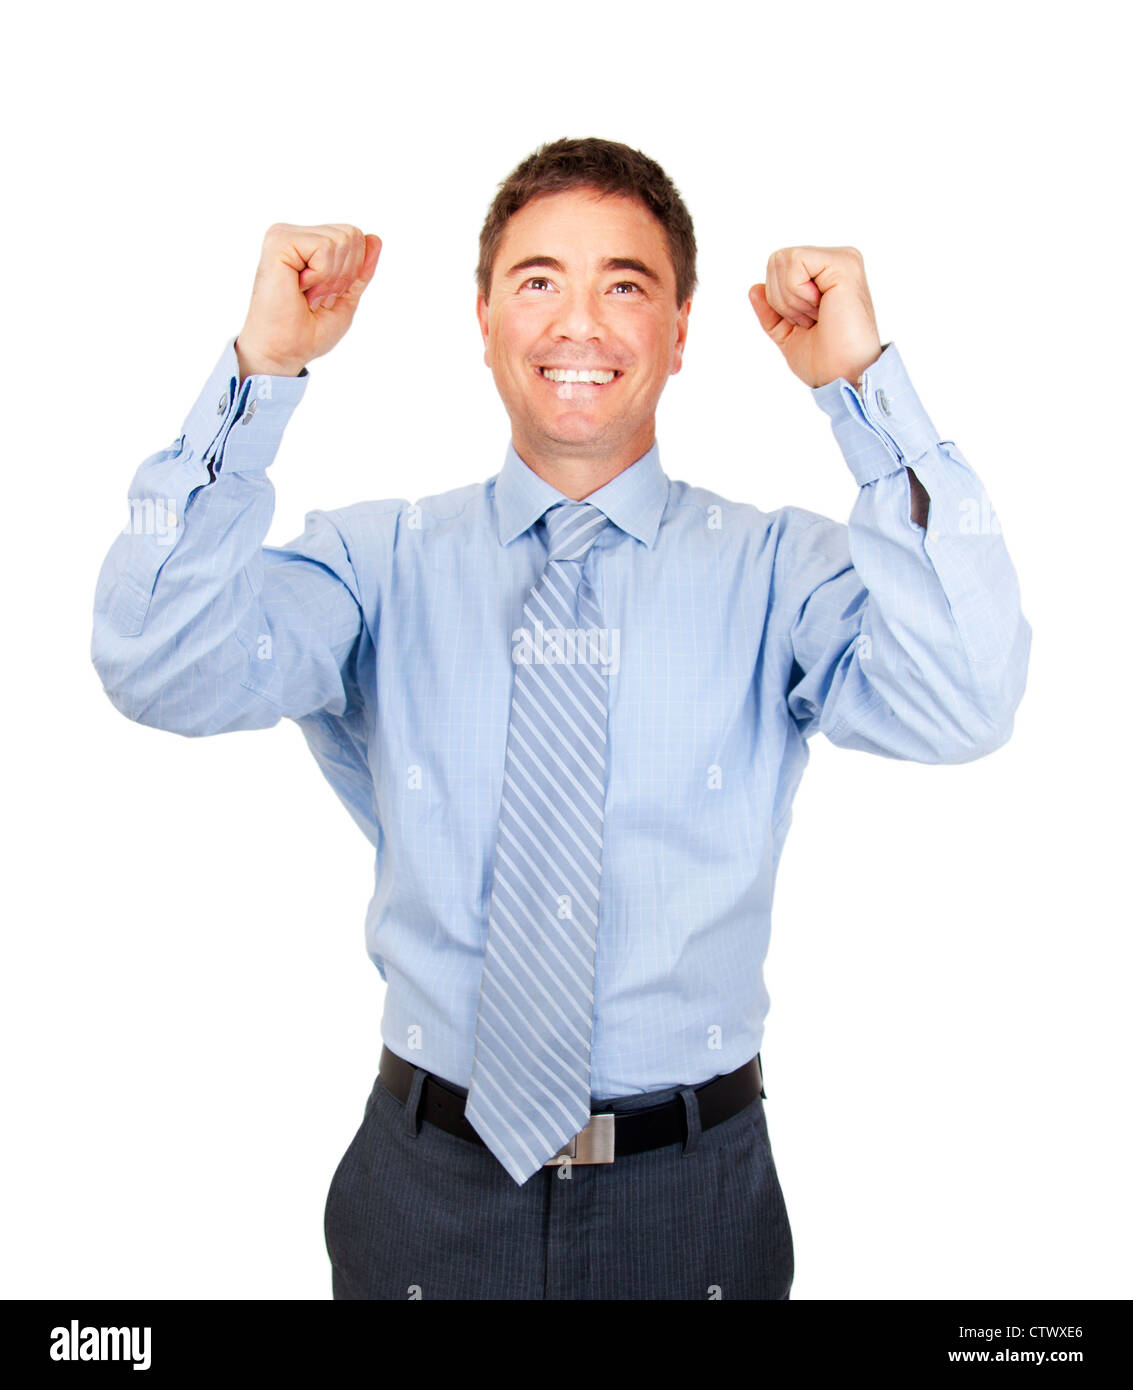 Business man giving a cheer for making the deal Stock Photo